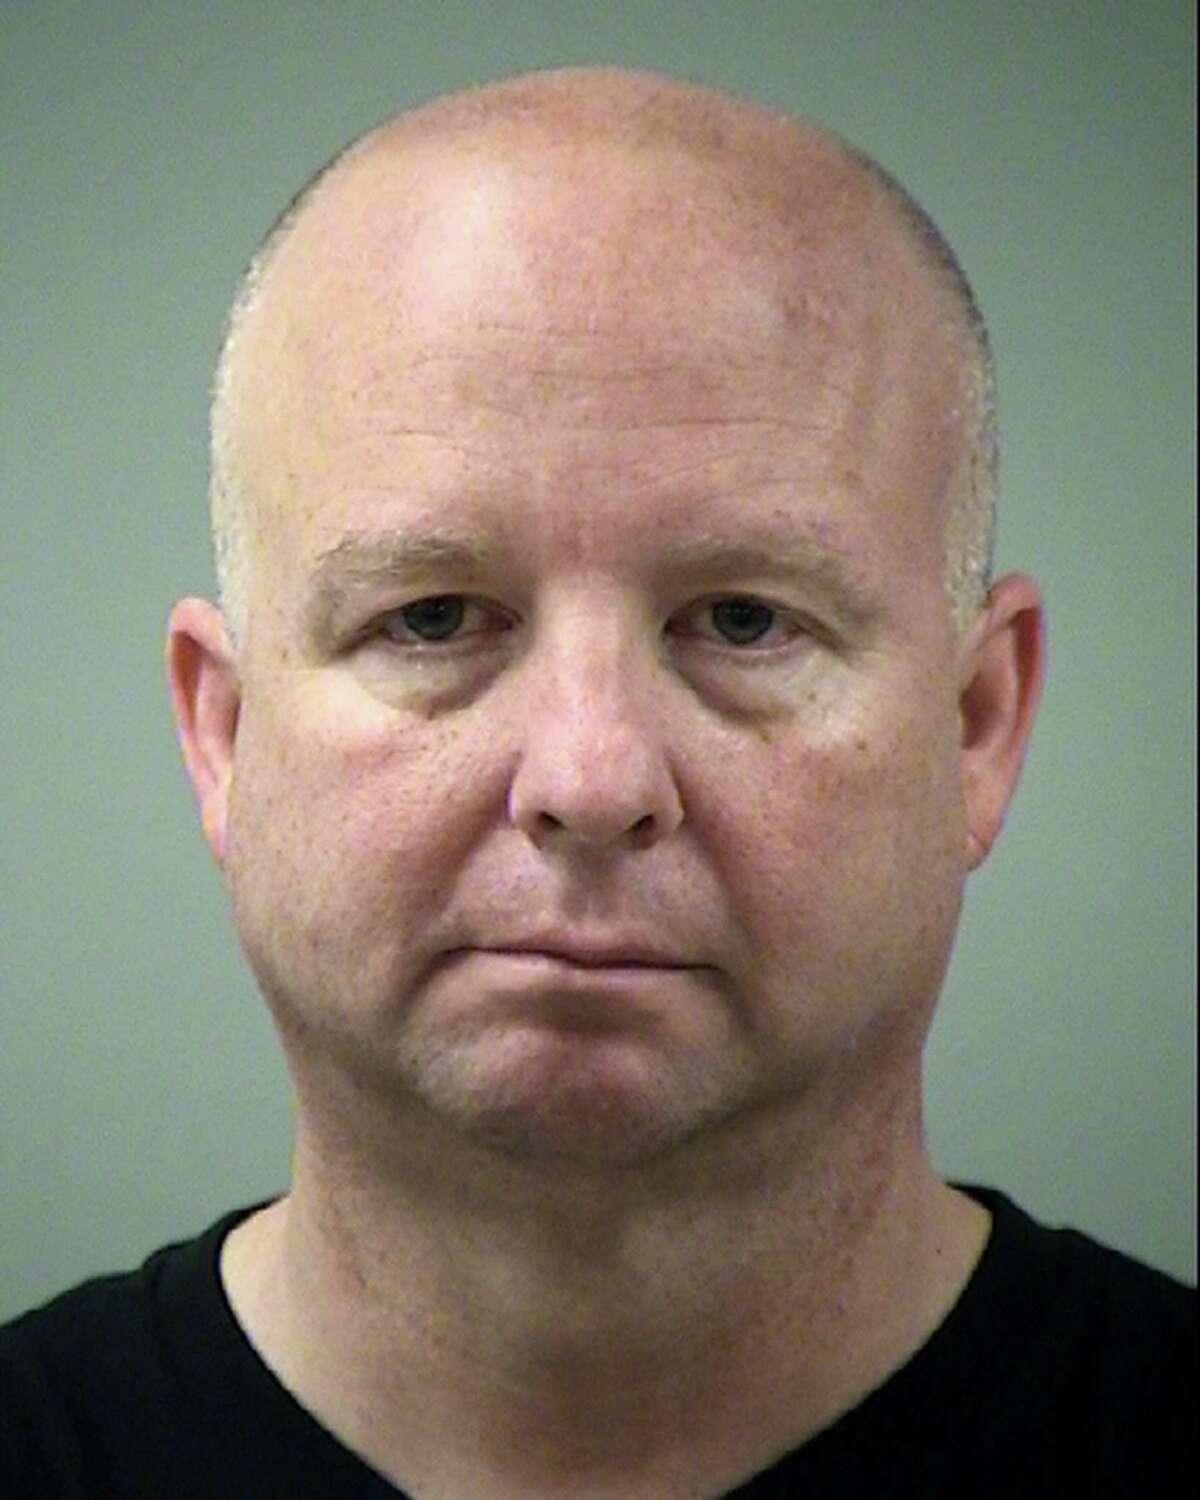 Bexar County Precinct 3 Commissioner Kevin Wolff, seen in a Sunday , July 31, 2016 booking mug provided by the Bear County Sheriff's office, was arrested and charged with Driving While Intoxicated at 3 a.m. Sunday after allegedly running into two vehicles at a Whataburger in the 1000 block of San Pedro Avenue.